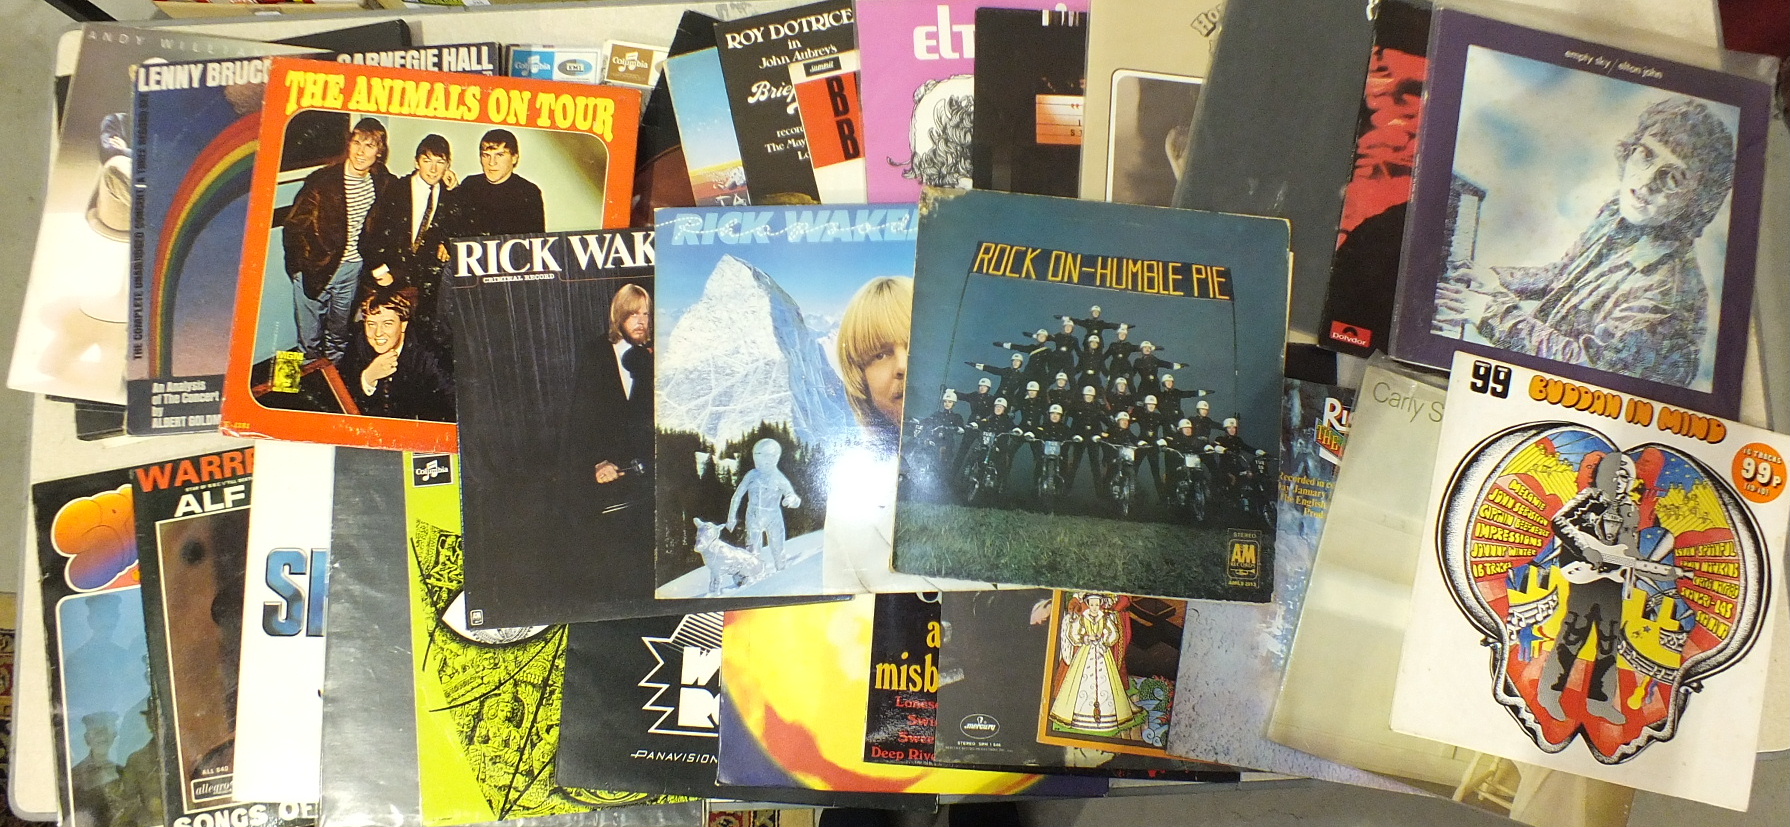 A collection of approximately sixty various LP's, including Elton John, The Animals, etc. and a